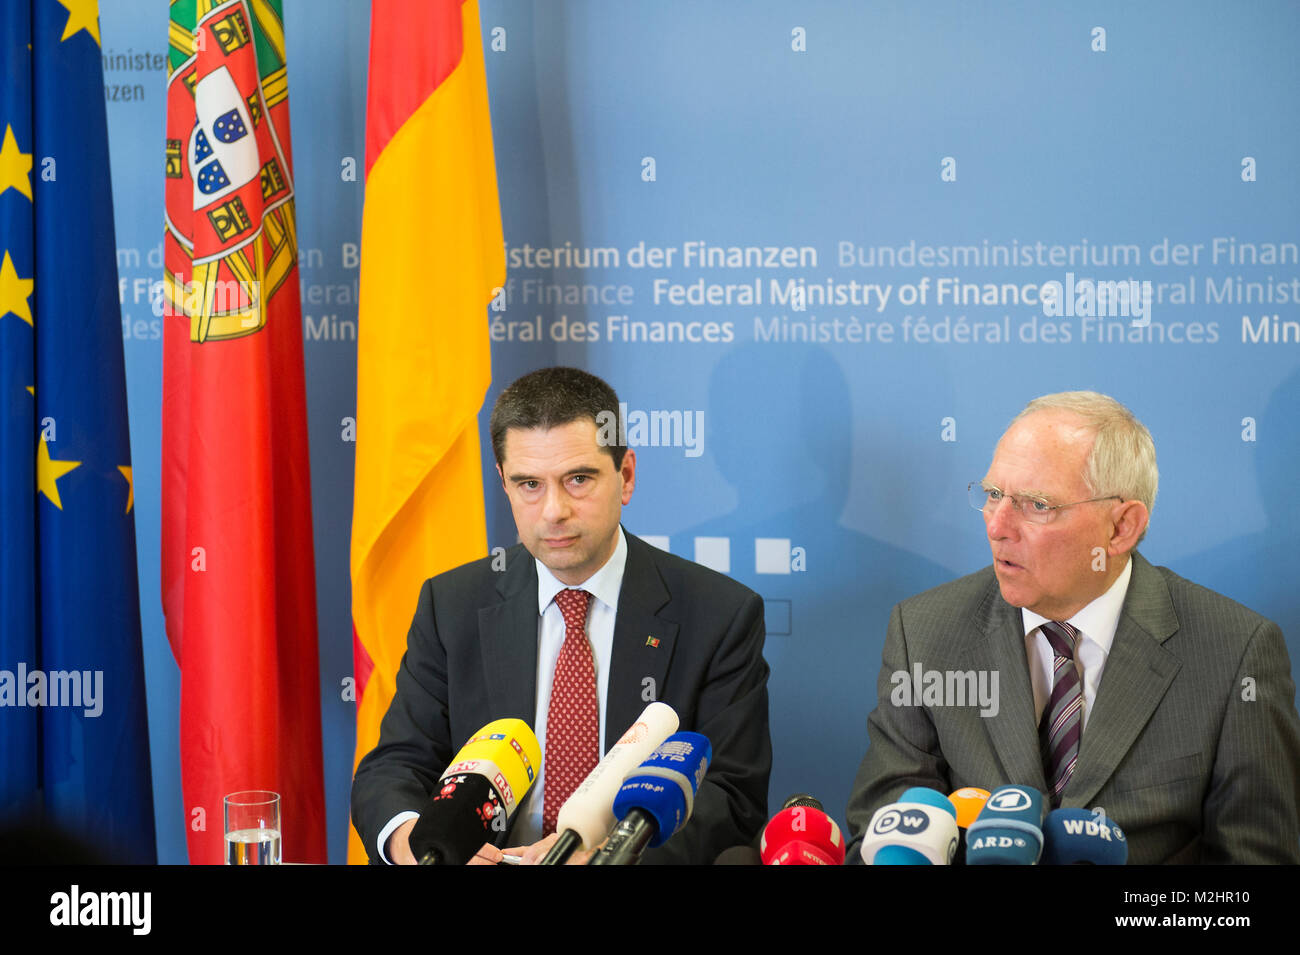 German Finance Minister, Wolfgang Schäuble and Portuguese Finance Minister, Vitor Gaspar. They meet to discuss about the German support to the SMEs in Portugal. The two ministers were assembled before with Chancellor Angela Merkel. Stock Photo